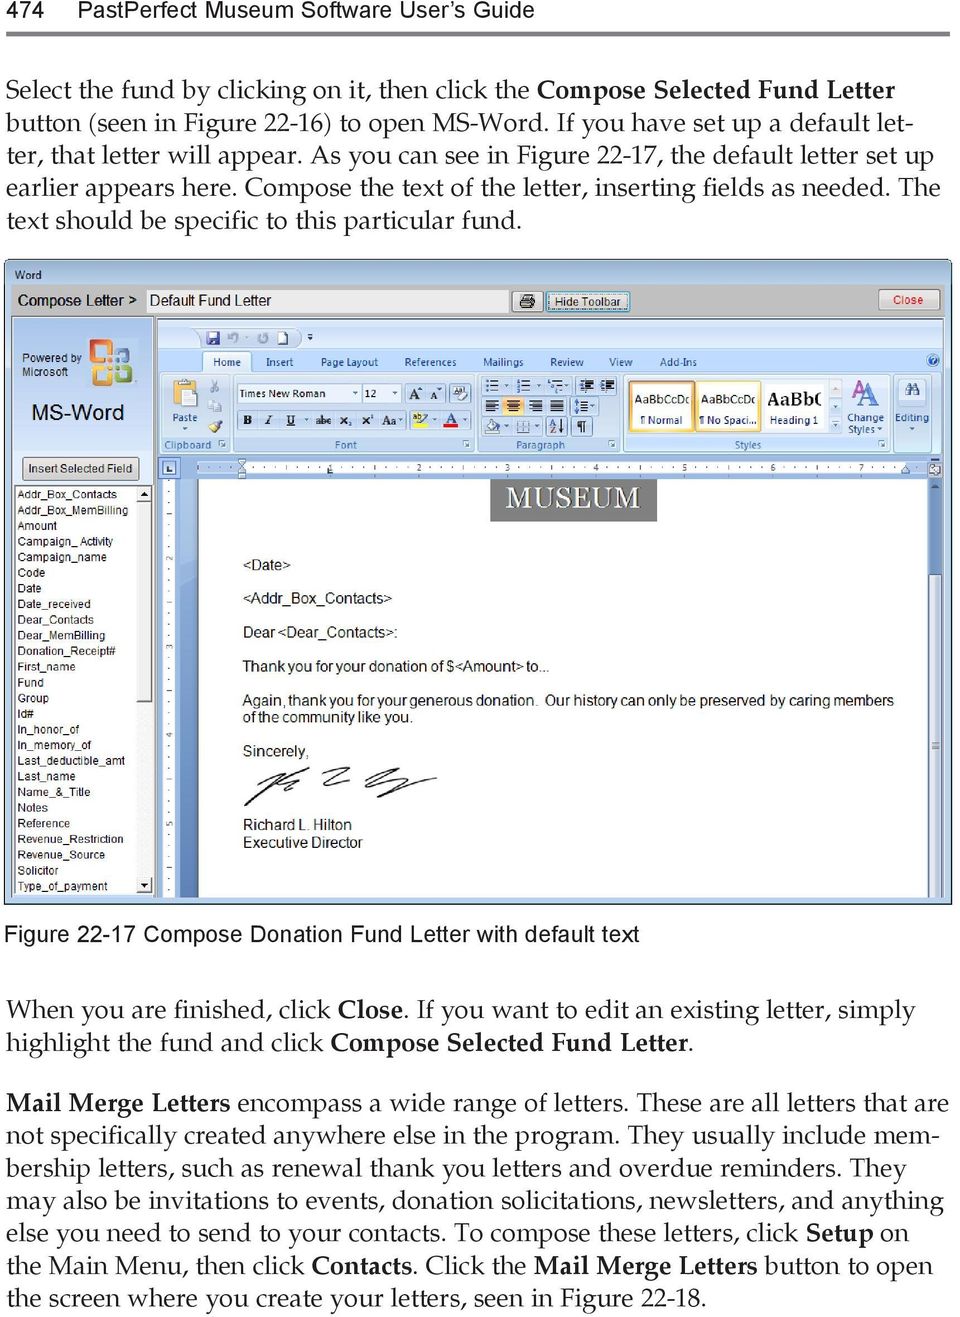 Compose the text of the letter, inserting fields as needed. The text should be specific to this particular fund.